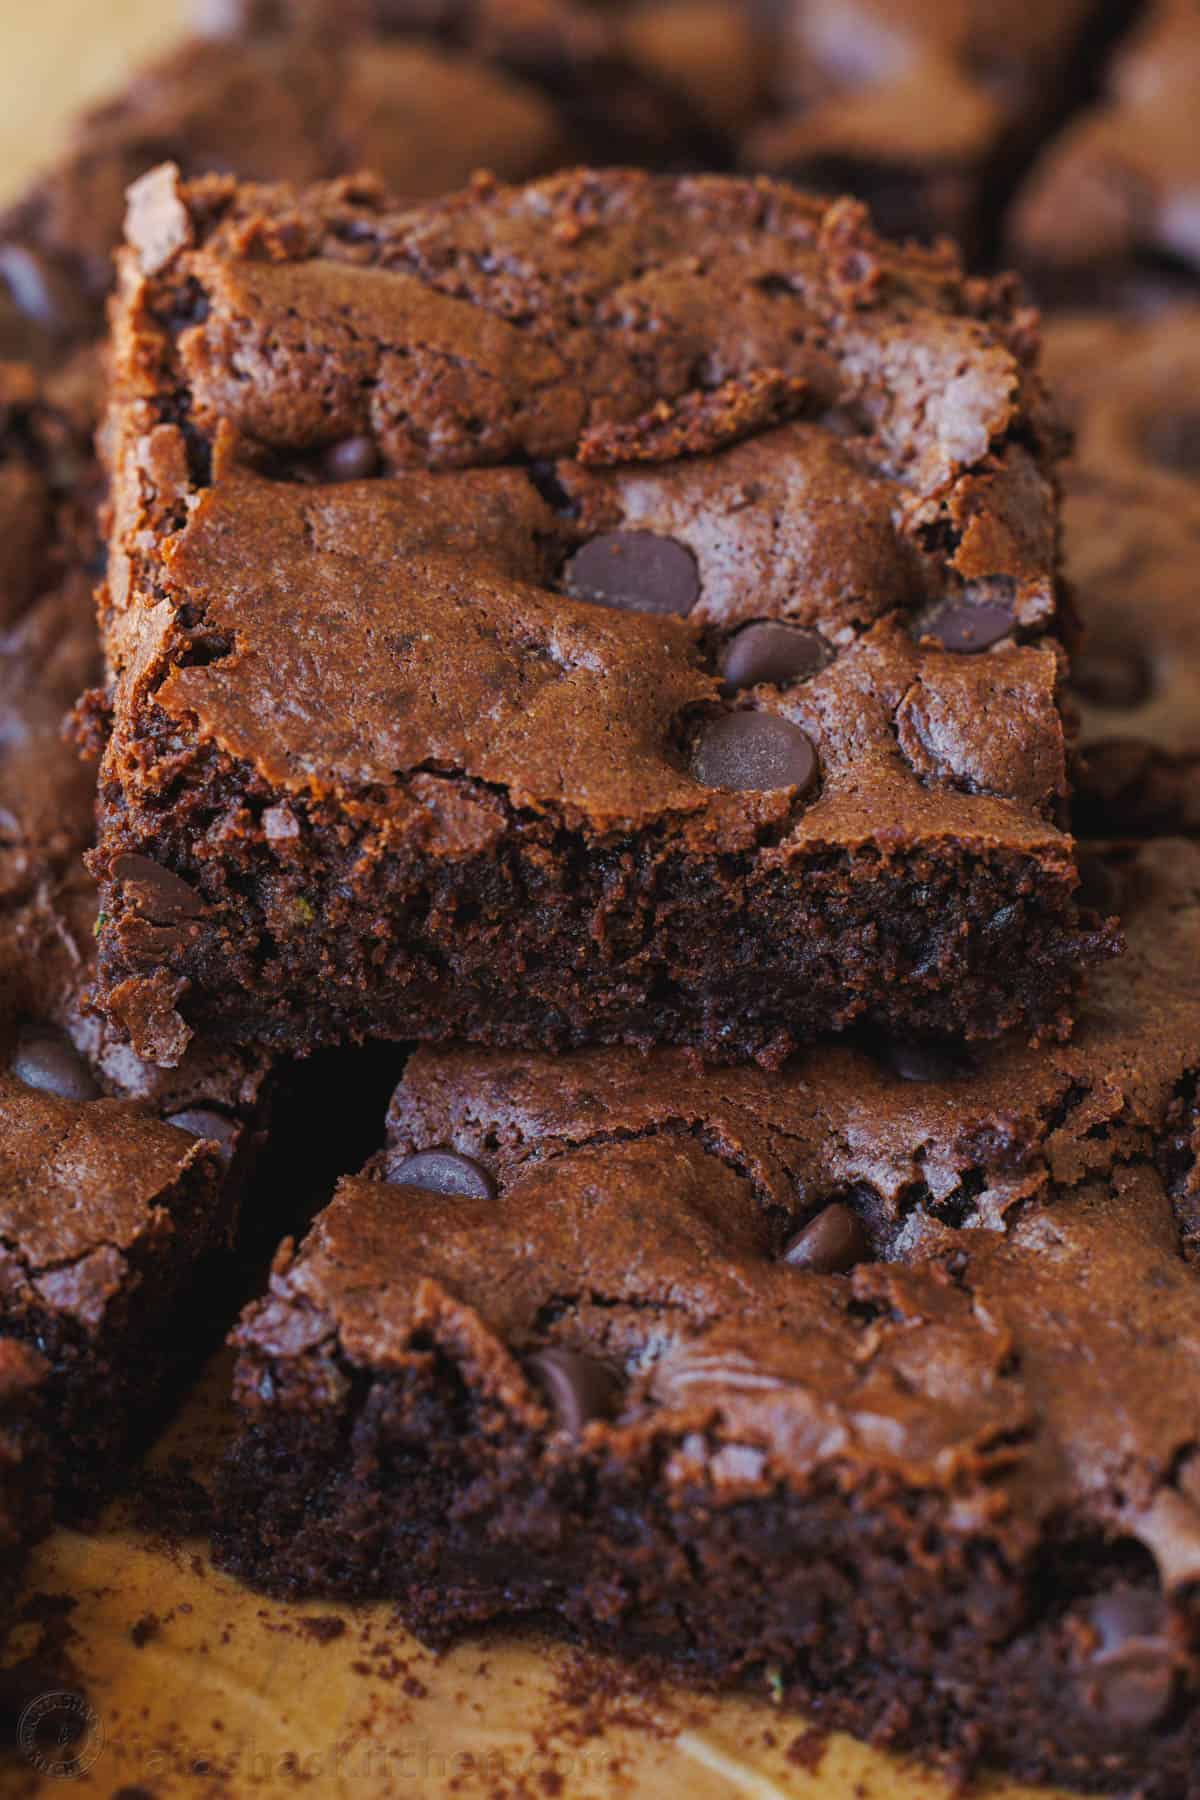 Zucchini brownies with chocolate chips baked inside, cut into squares